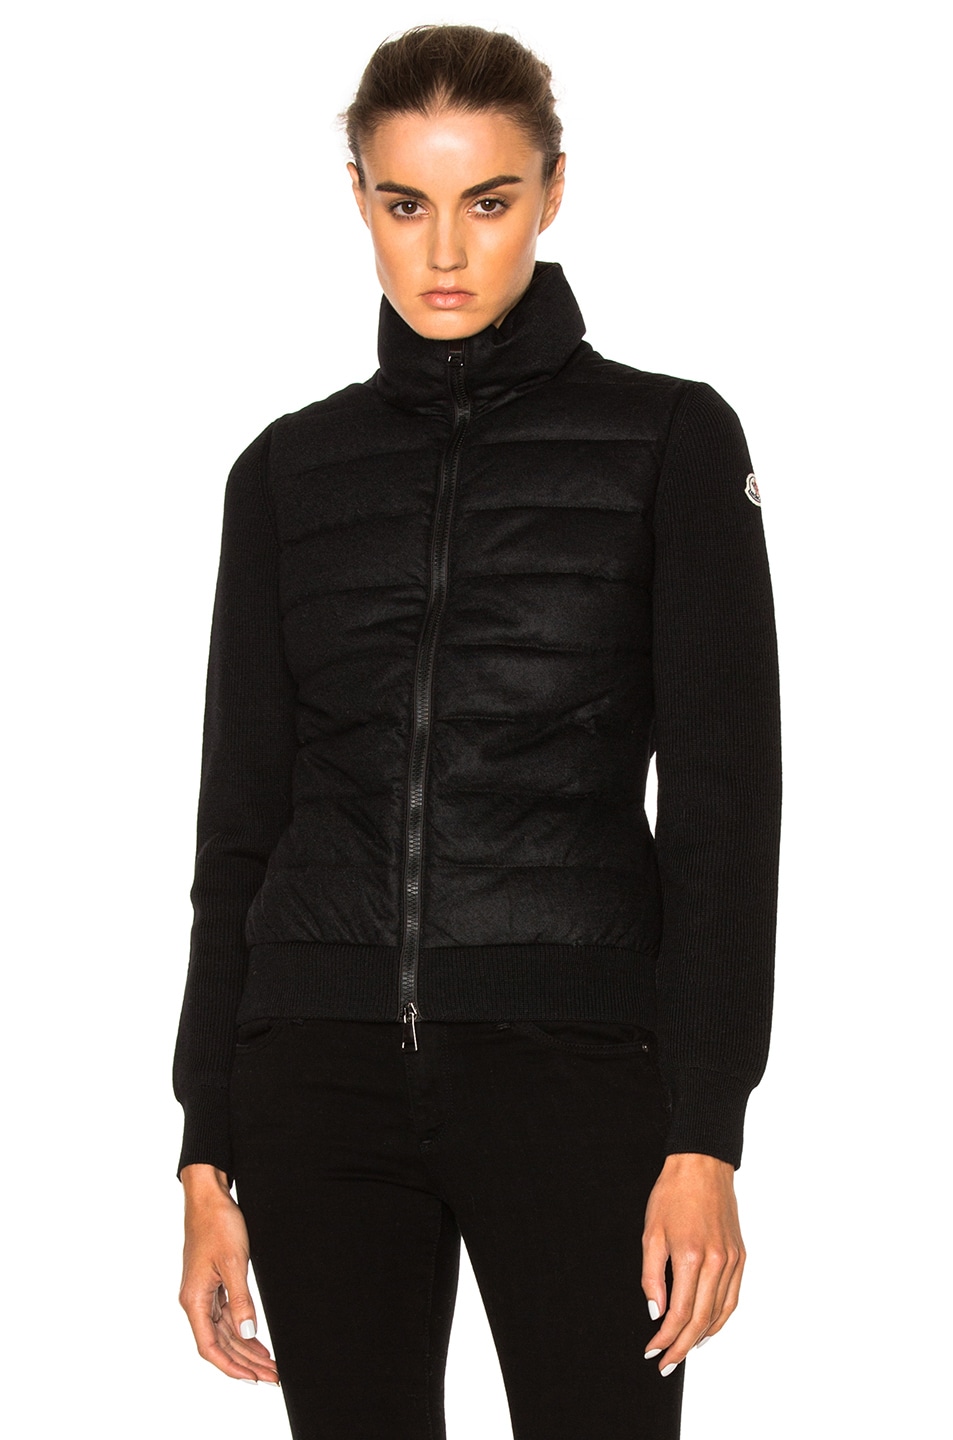 Moncler Maglione Tricot Cardigan Jacket in Black | FWRD